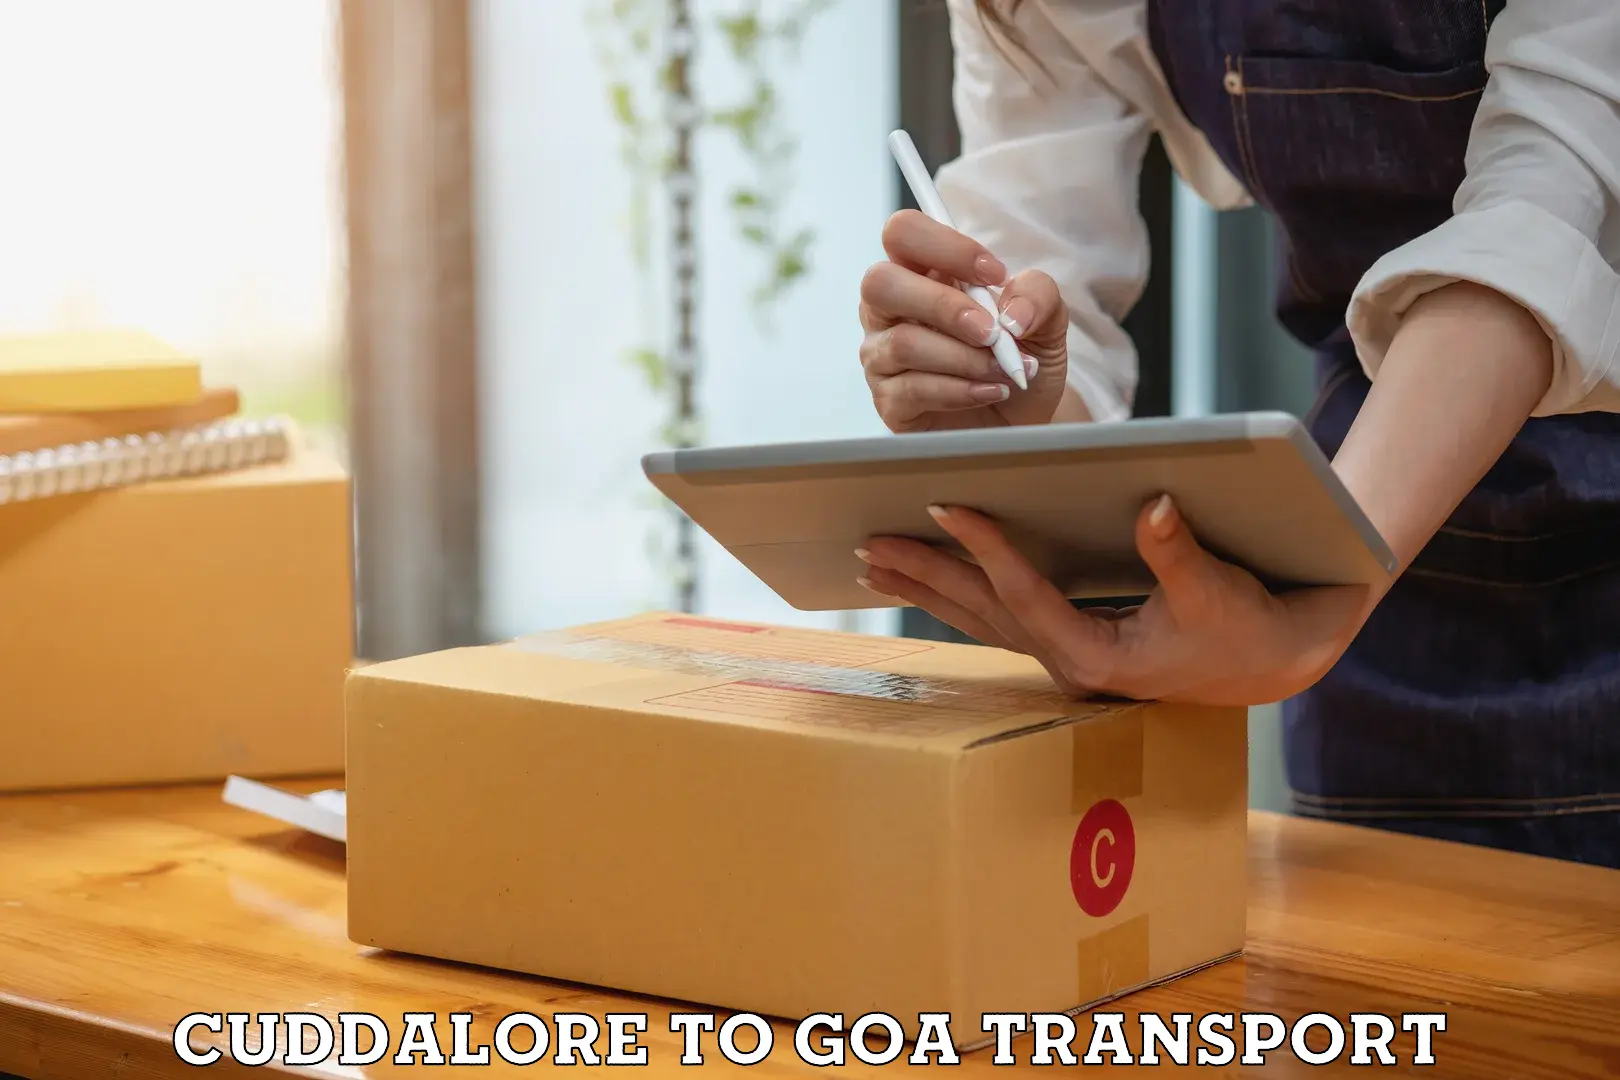 Commercial transport service Cuddalore to IIT Goa